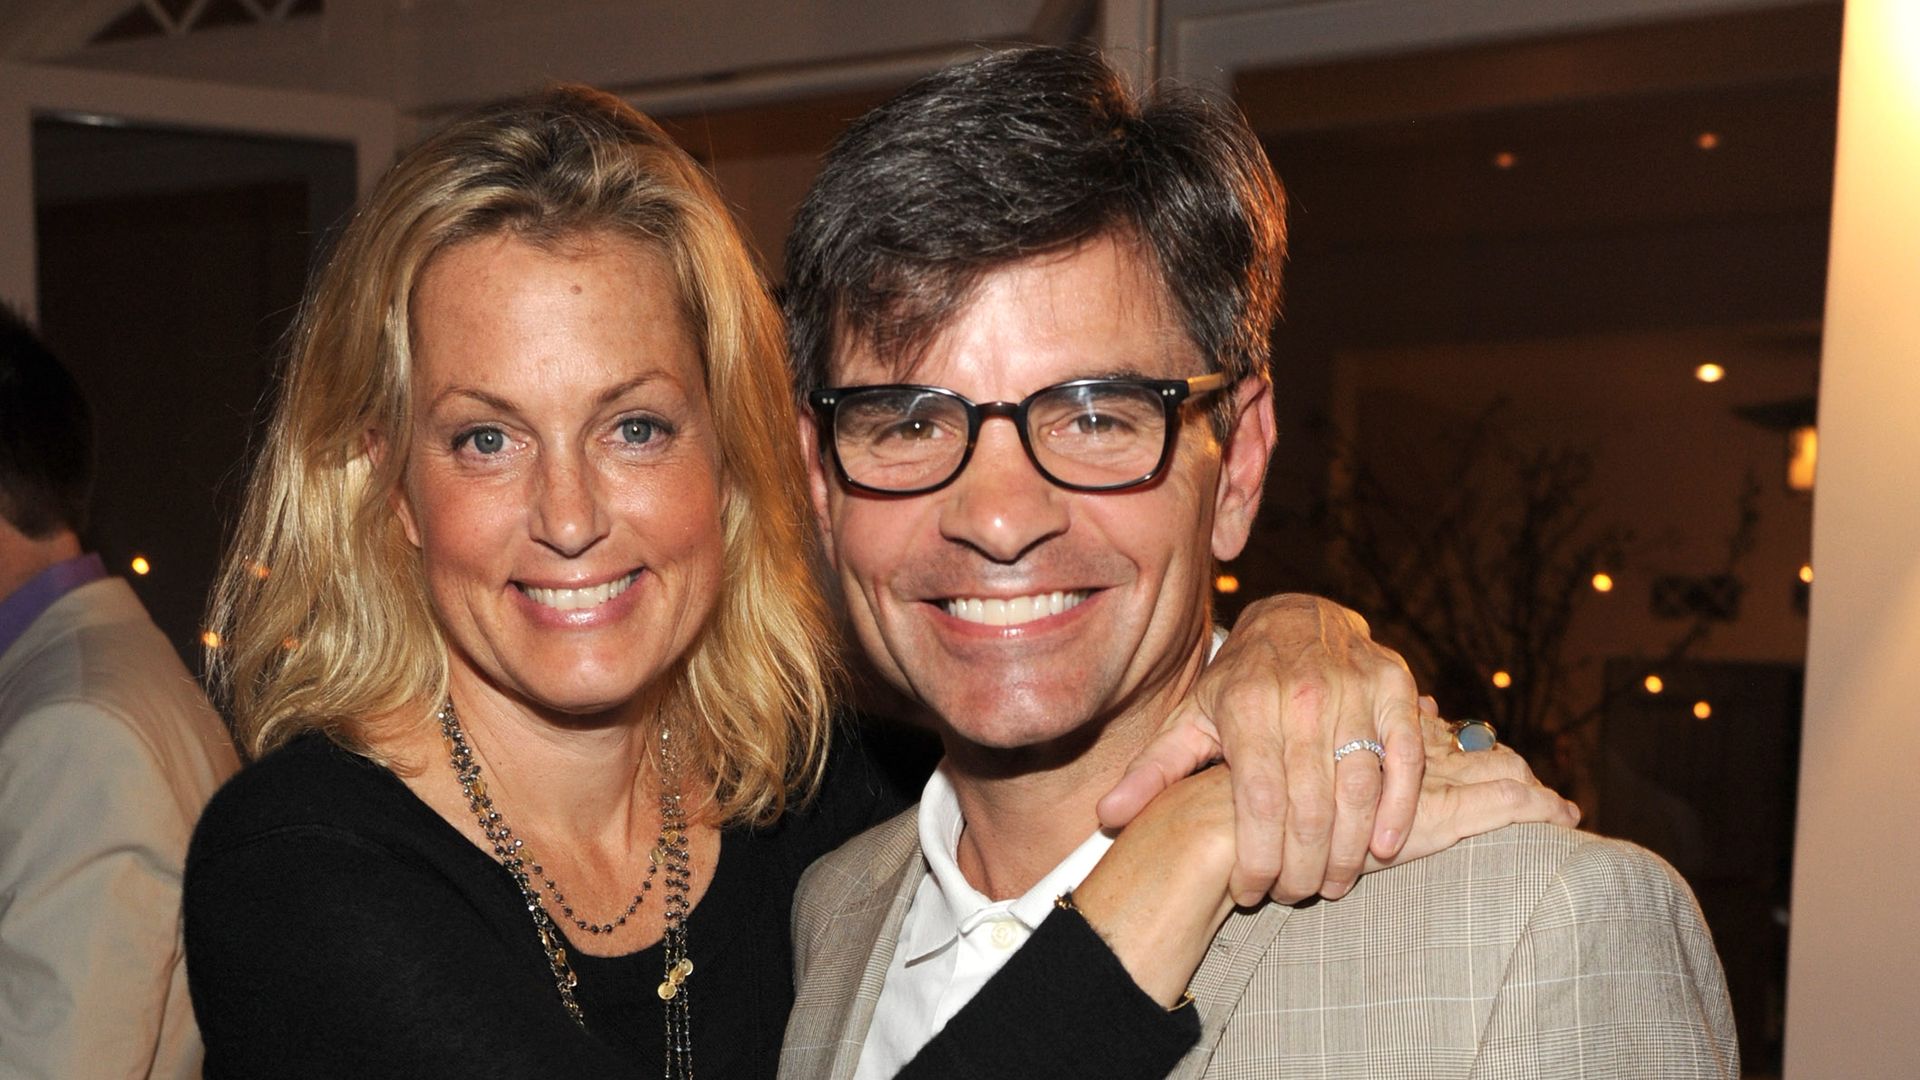 Ali Wentworth and George Stephanopoulos with arms around each other